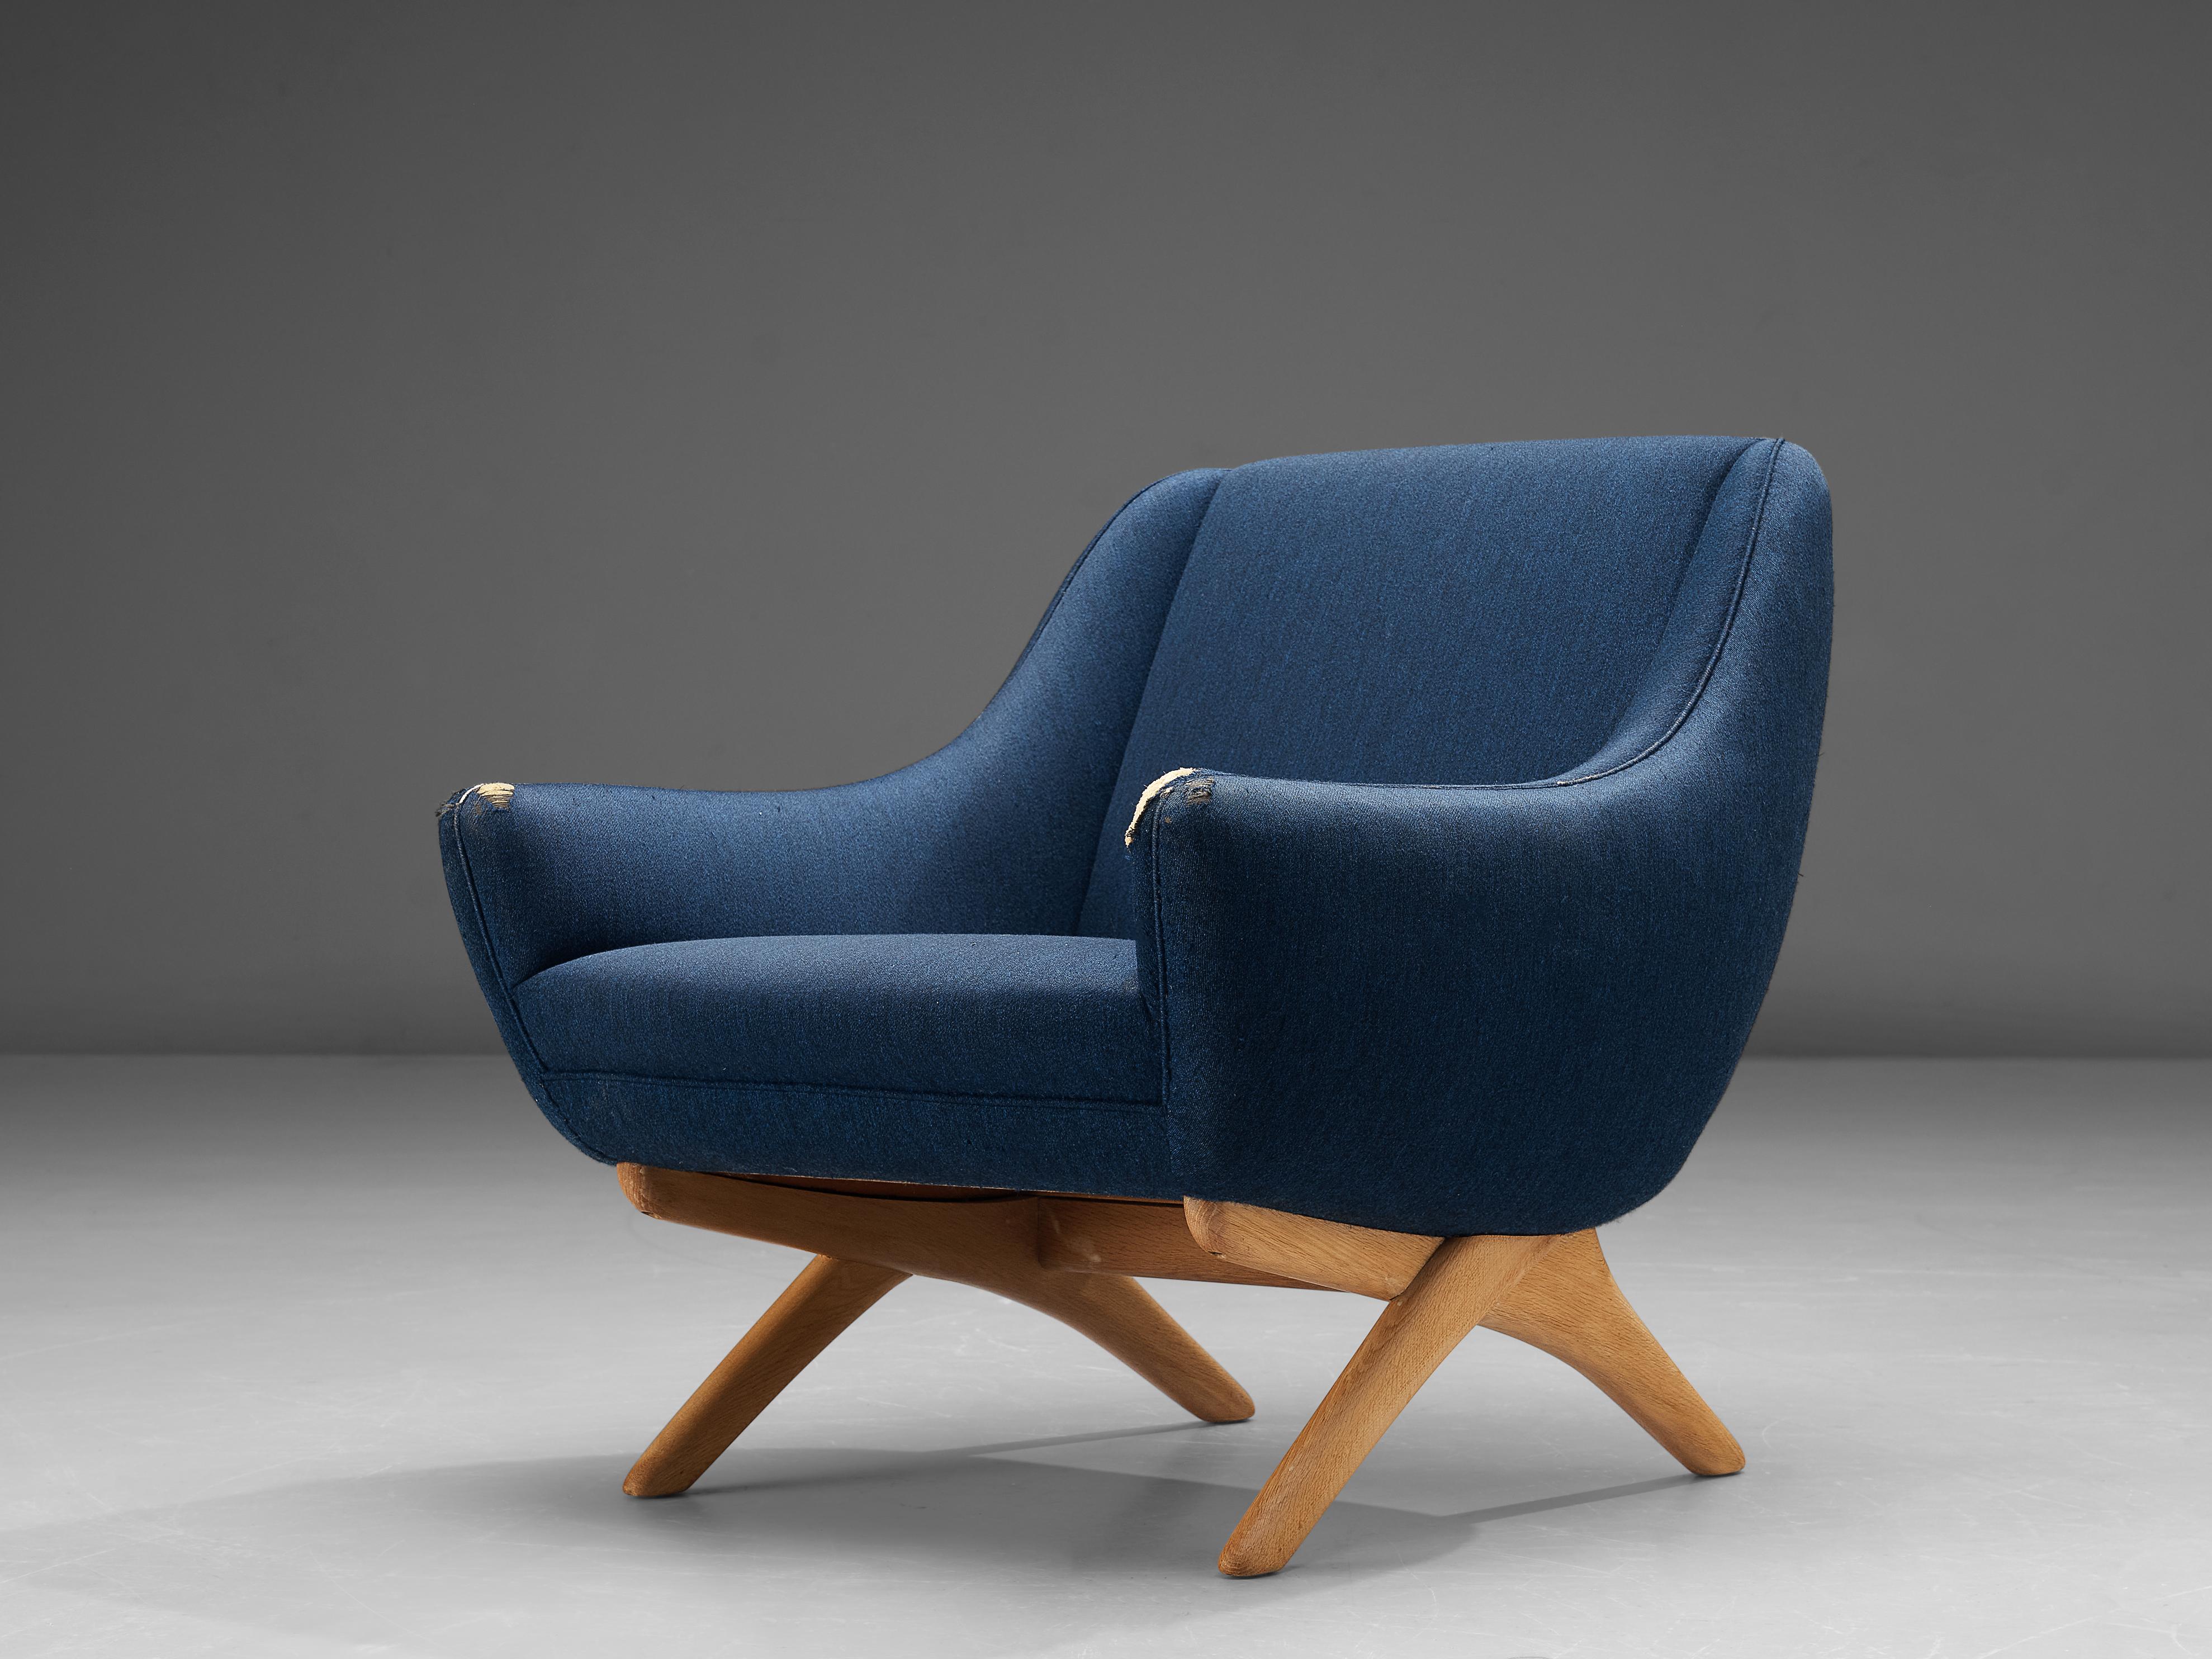 Illum Wikkelsø, lounge chair, fabric, teak, Denmark, 1950s

Comfortable lounge chair by Danish designer Illum Wikkelsø. The shape of the chair is characterized by the high backrest that floats over into the low, pointy armrests. A dynamic base in